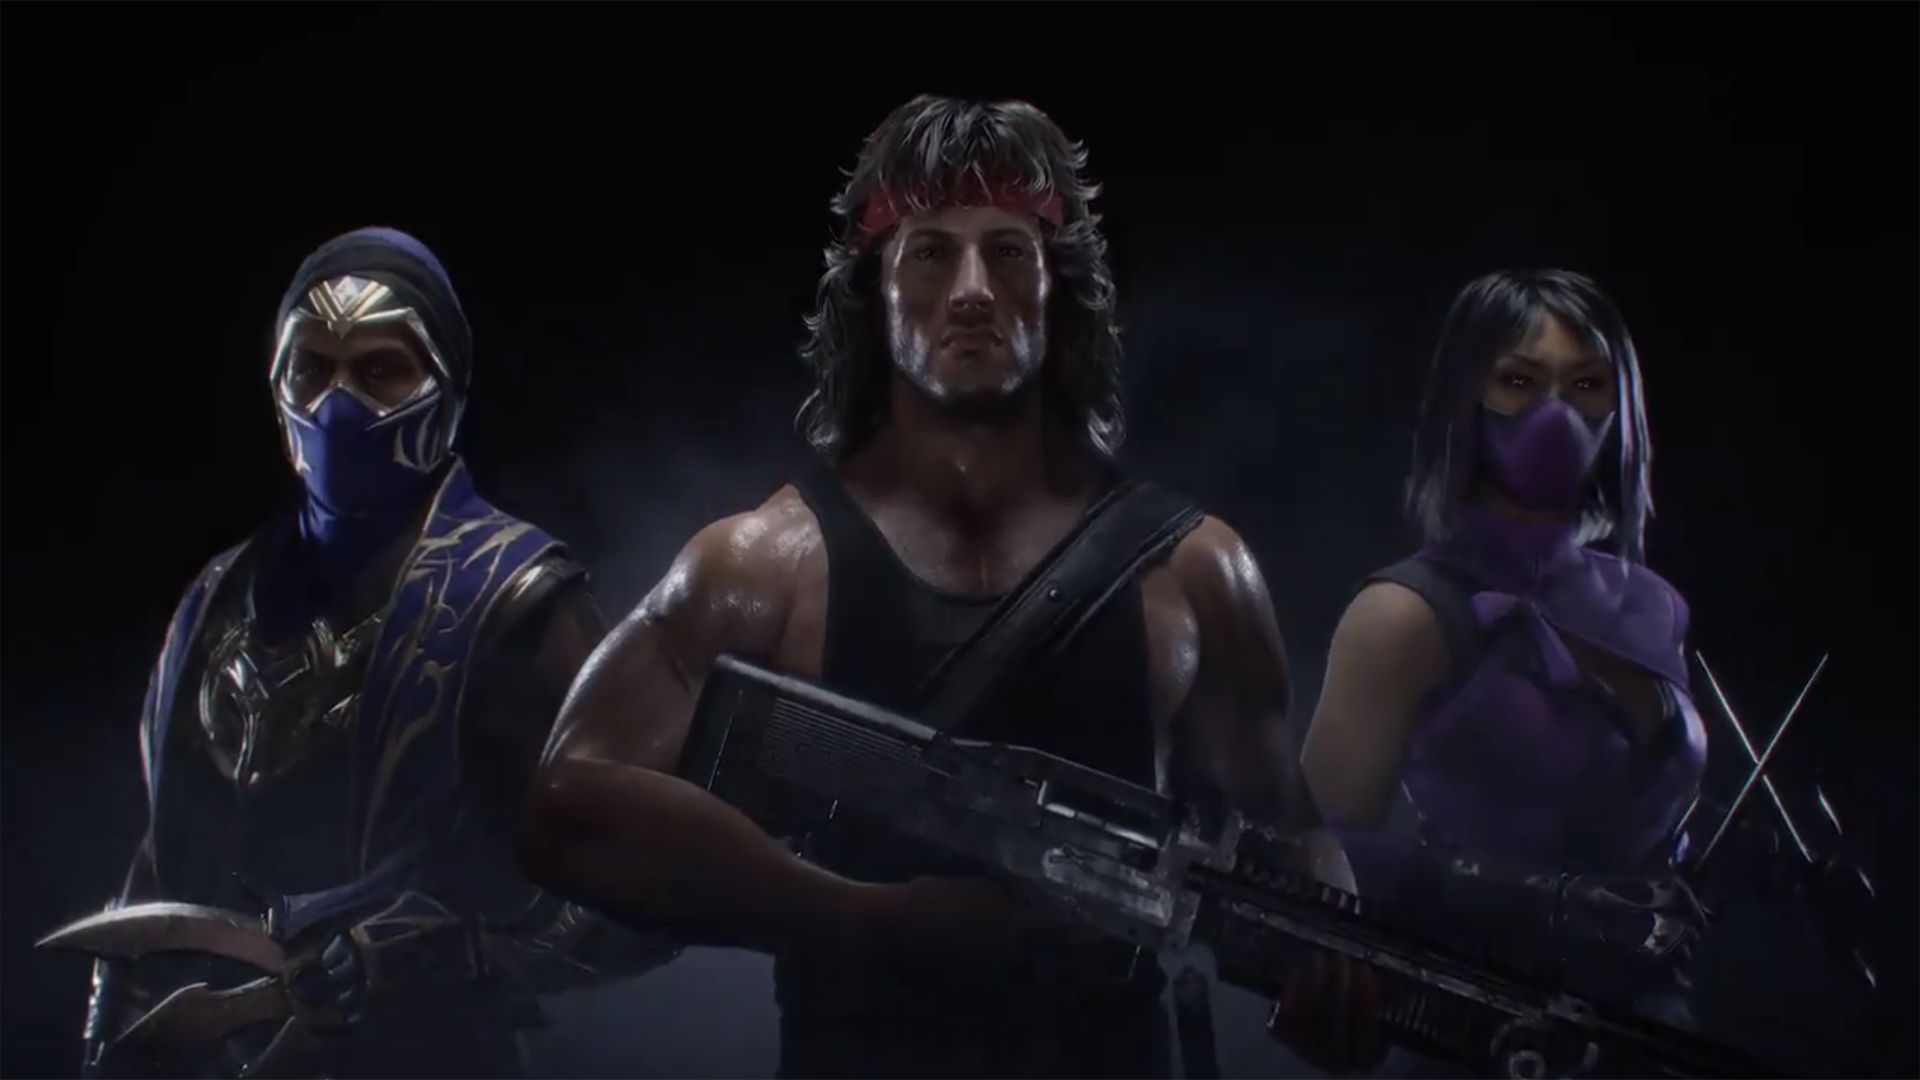 John Rambo joins Mortal Kombat 11 as the game comes to PS Xbox Series X next month